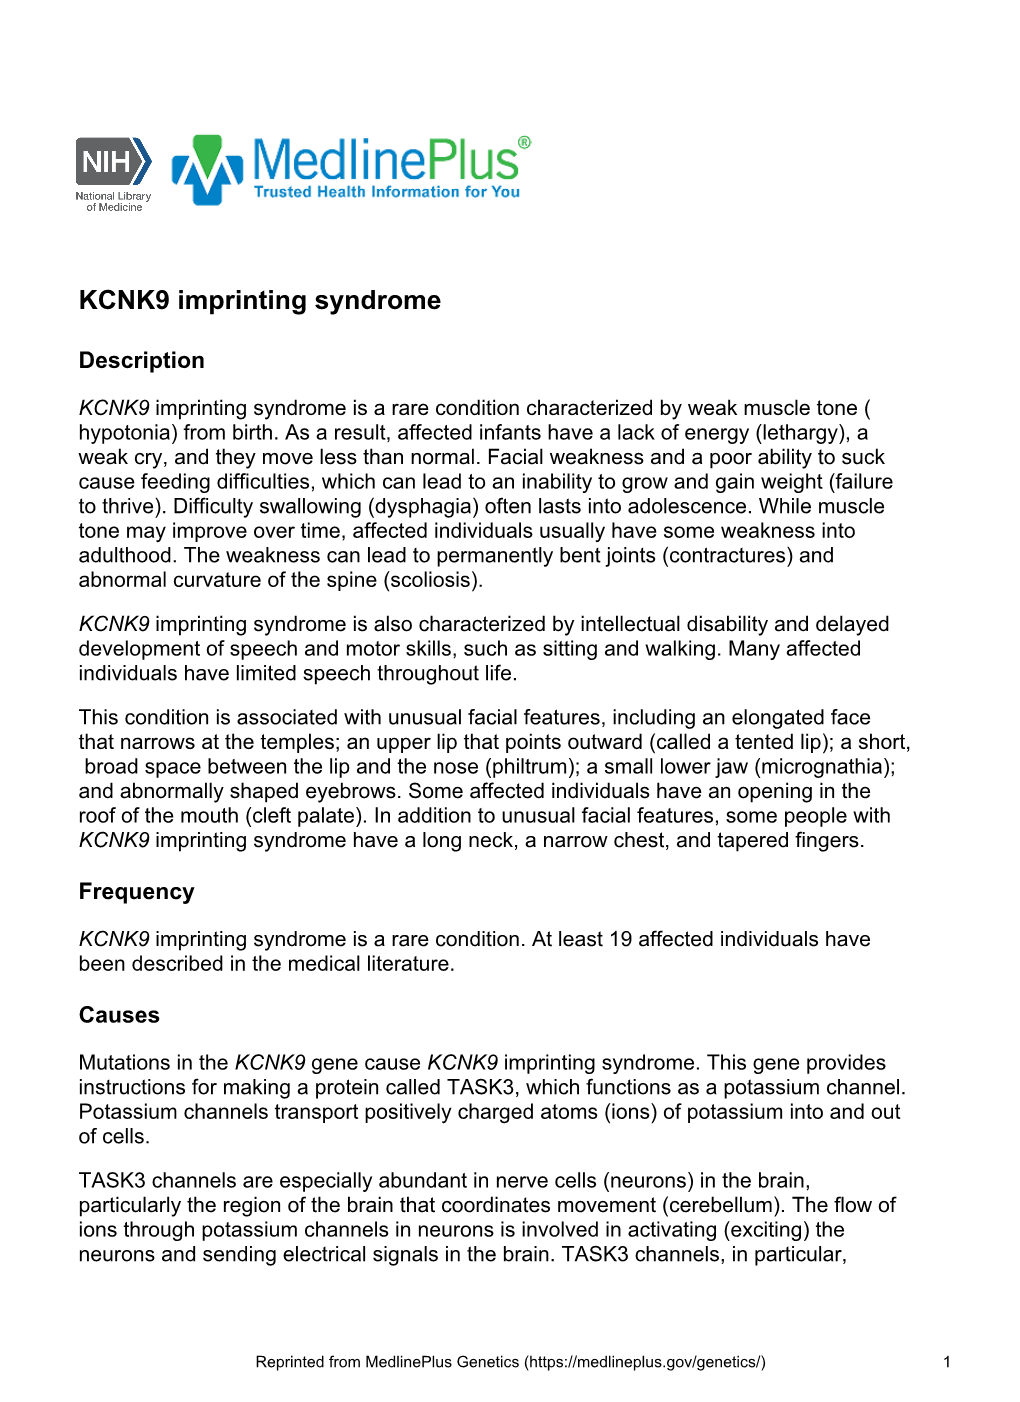 KCNK9 Imprinting Syndrome